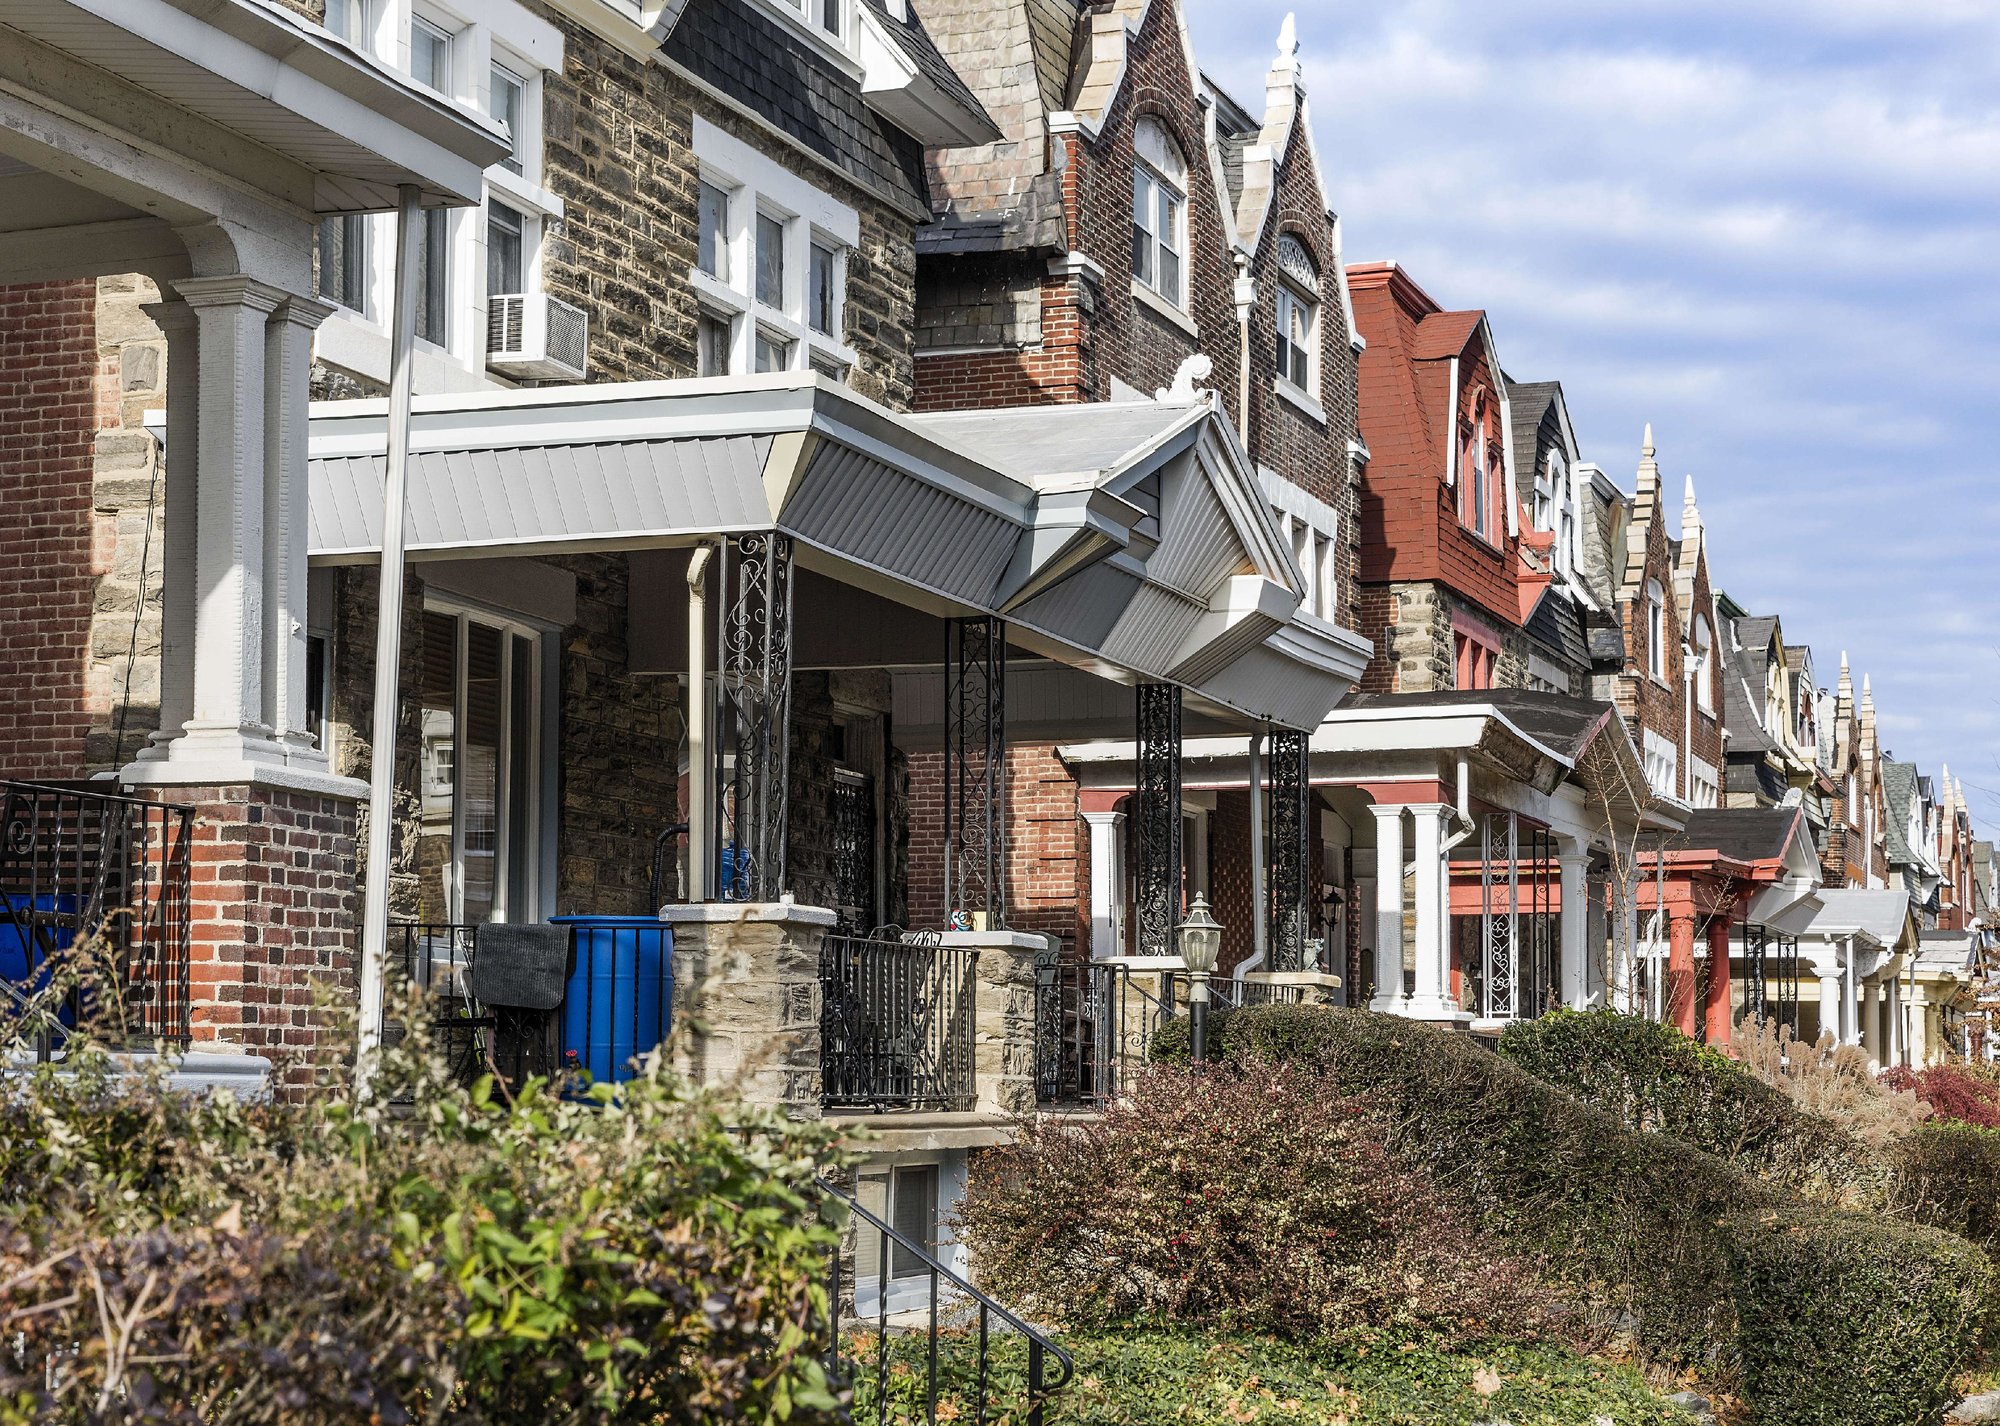 Row homes with covered porches - Source: John Greim/LightRocket // Getty Images